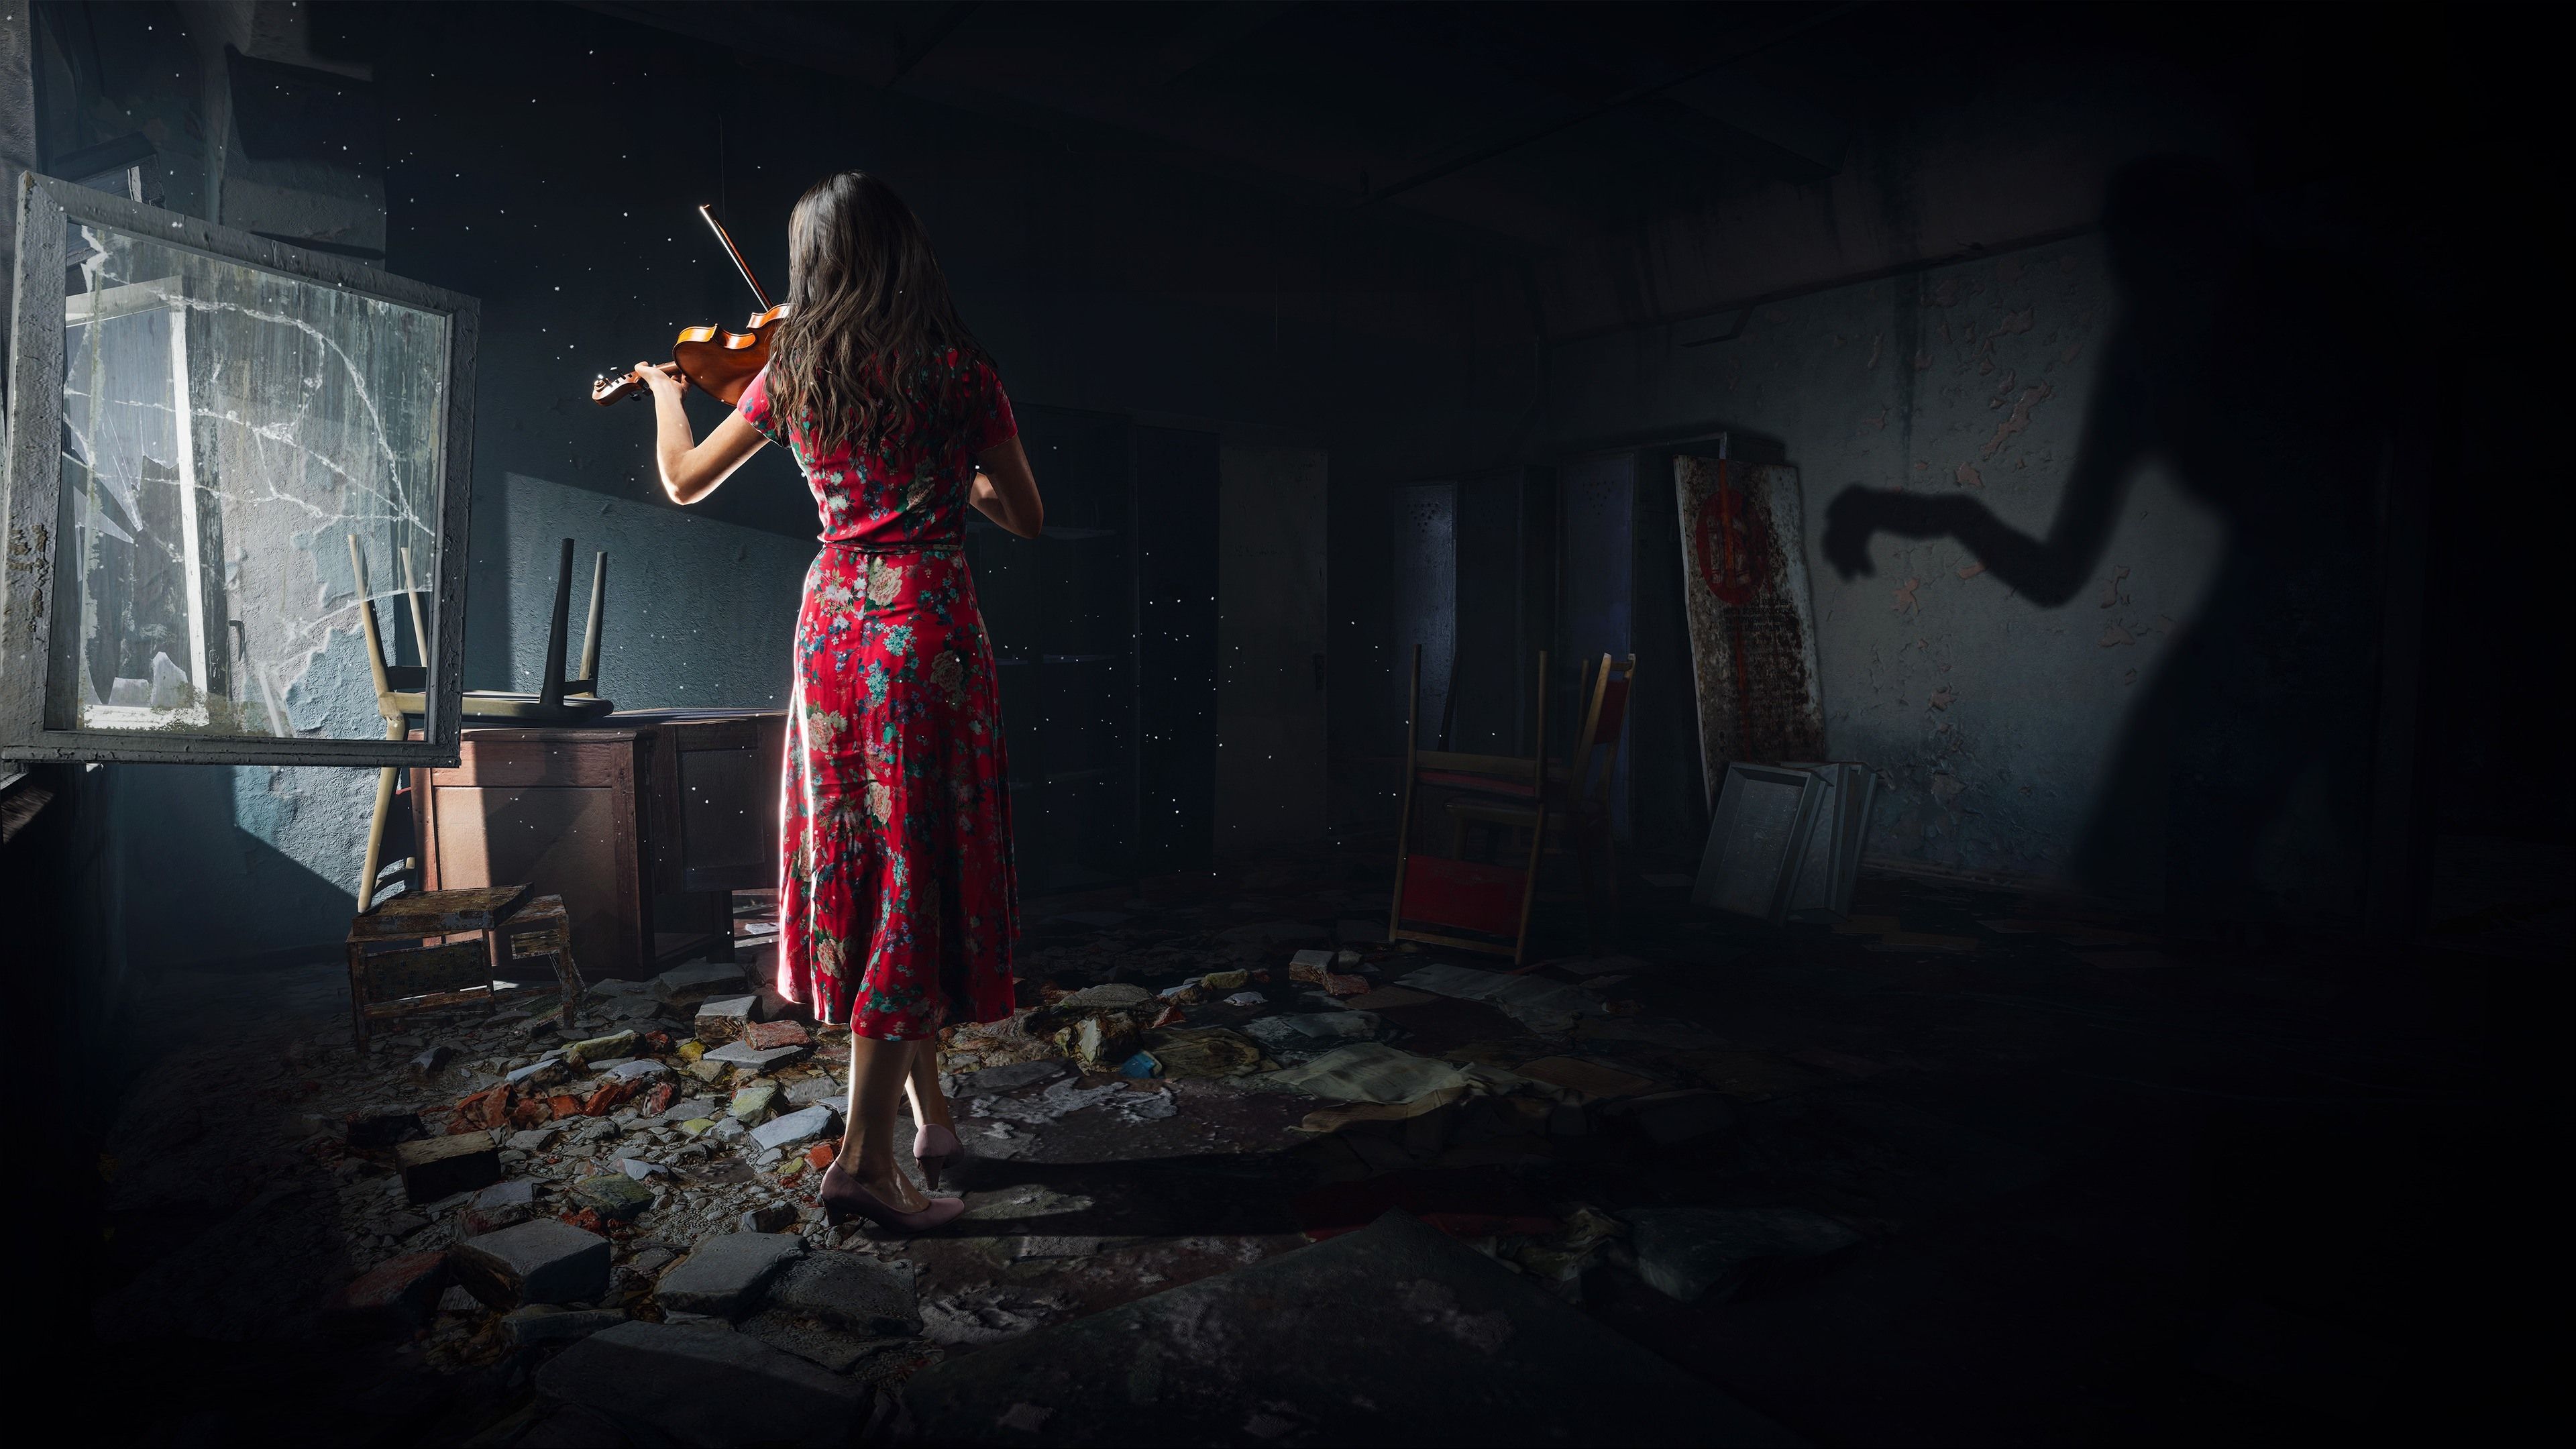 Free download Wallpaper Chernobylite 2019 PC game girl back view violin [3840x2160] for your Desktop, Mobile & Tablet. Explore 4K PC WallpaperK PC Wallpaper, 4K Wallpaper for PC